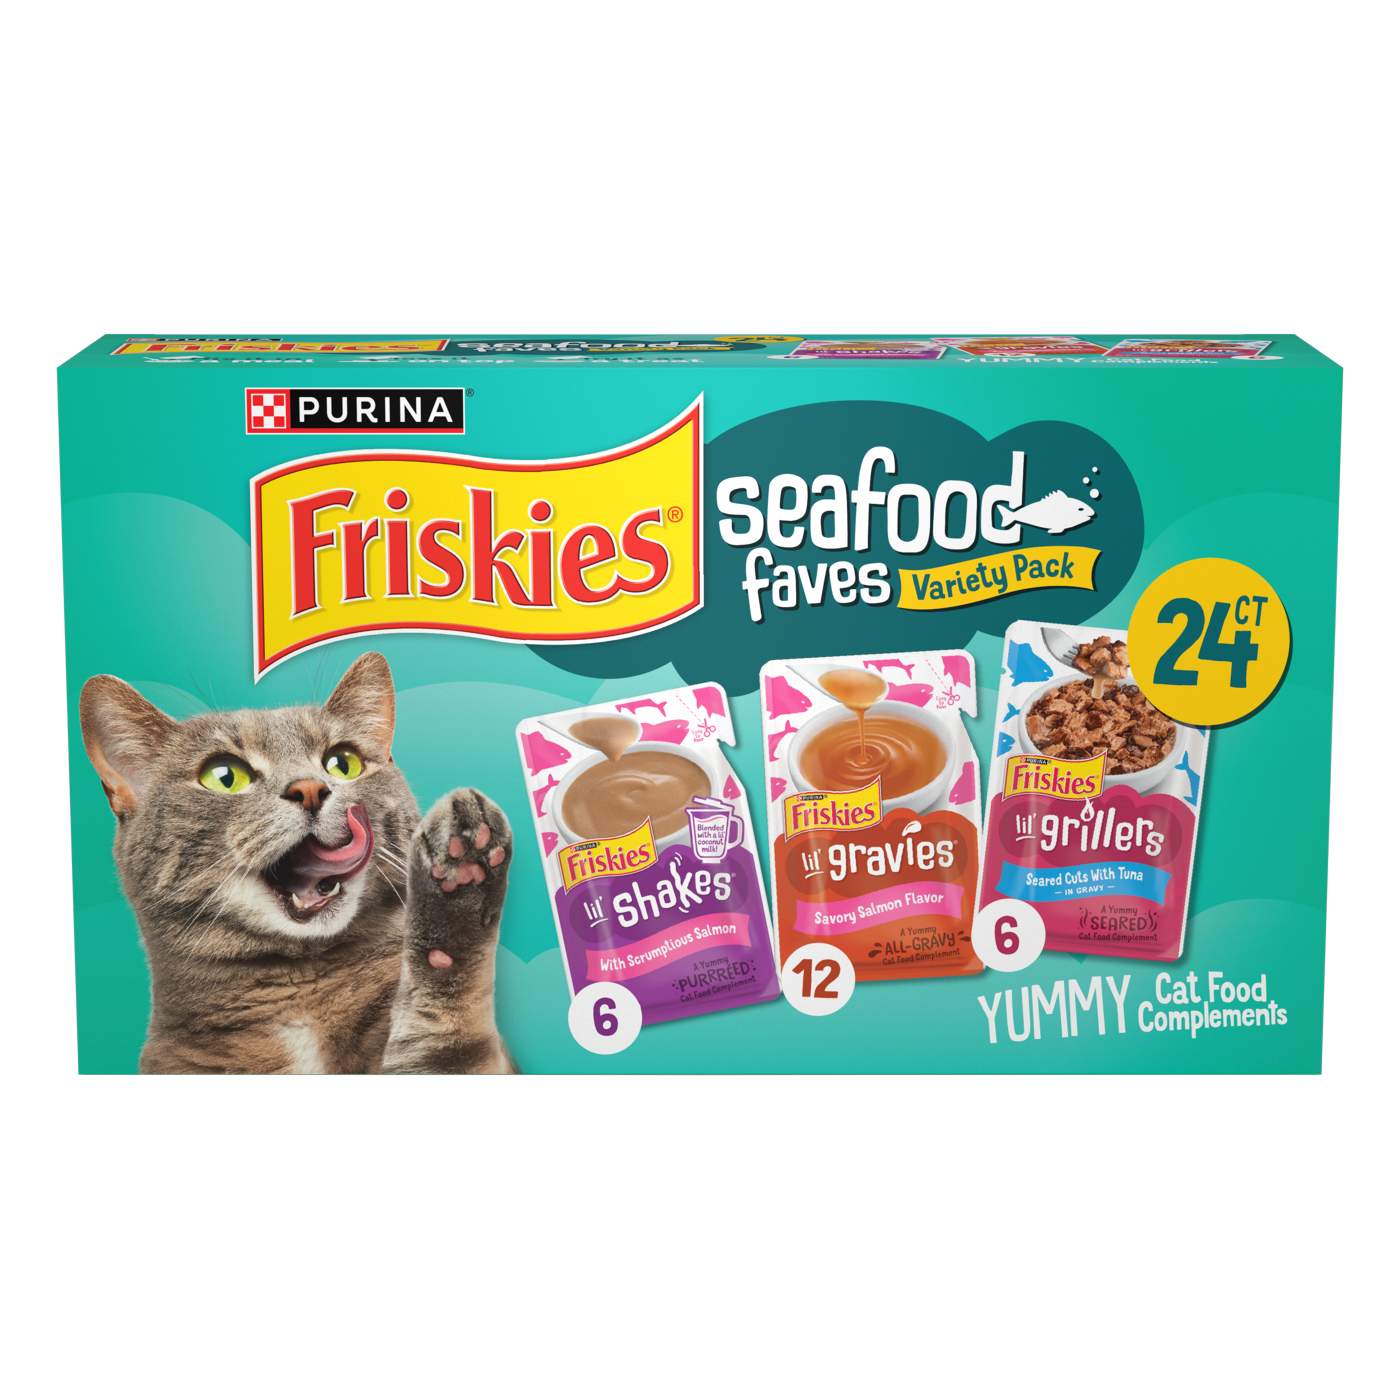 Friskies Wet Cat Treats Variety Pack, Seafood Faves; image 1 of 8